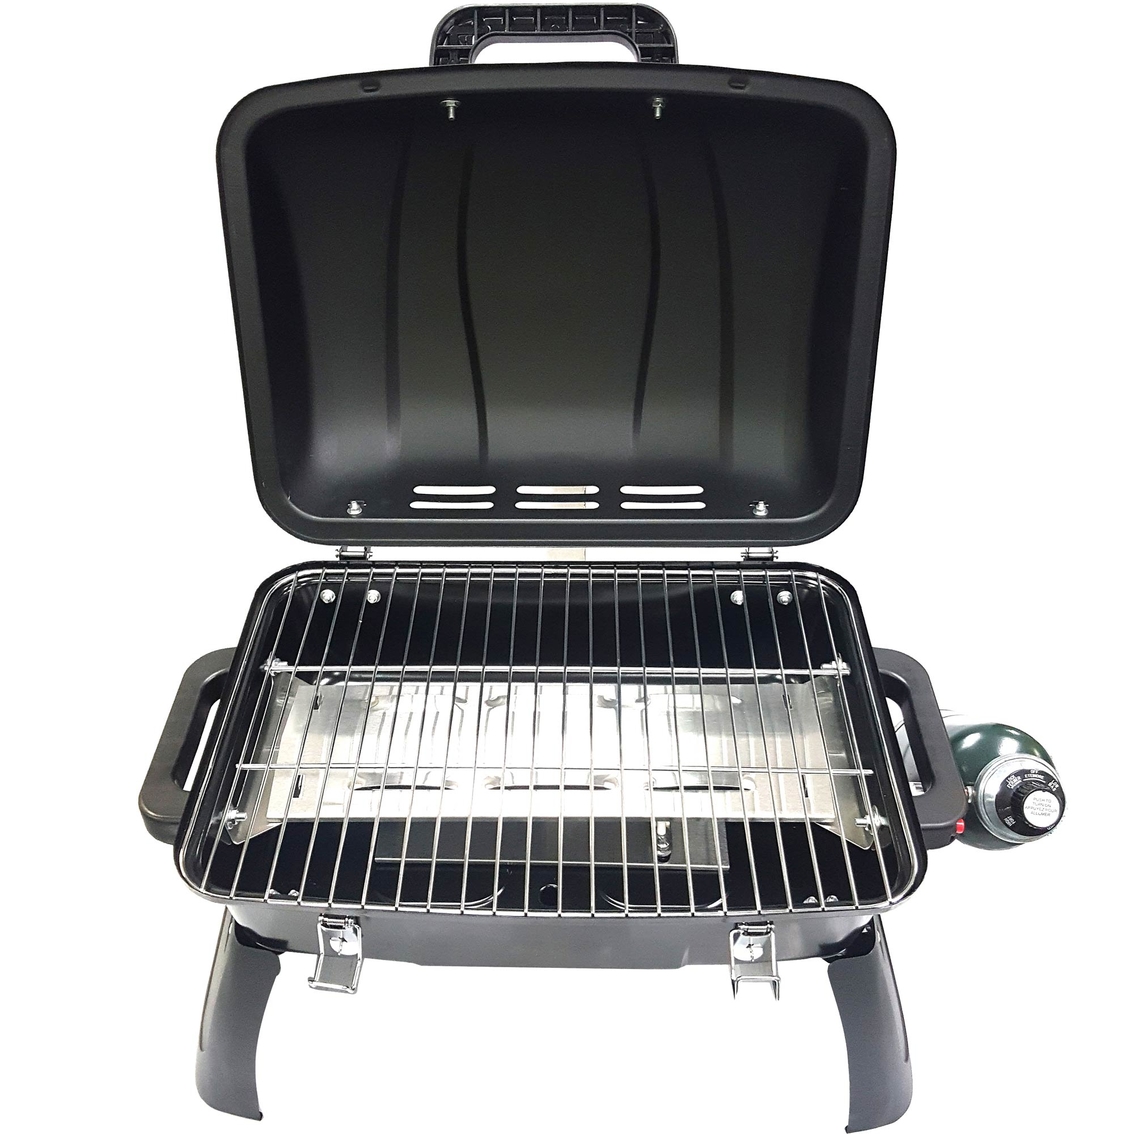 GrillSmith Table Top Gas Grill - Image 3 of 3